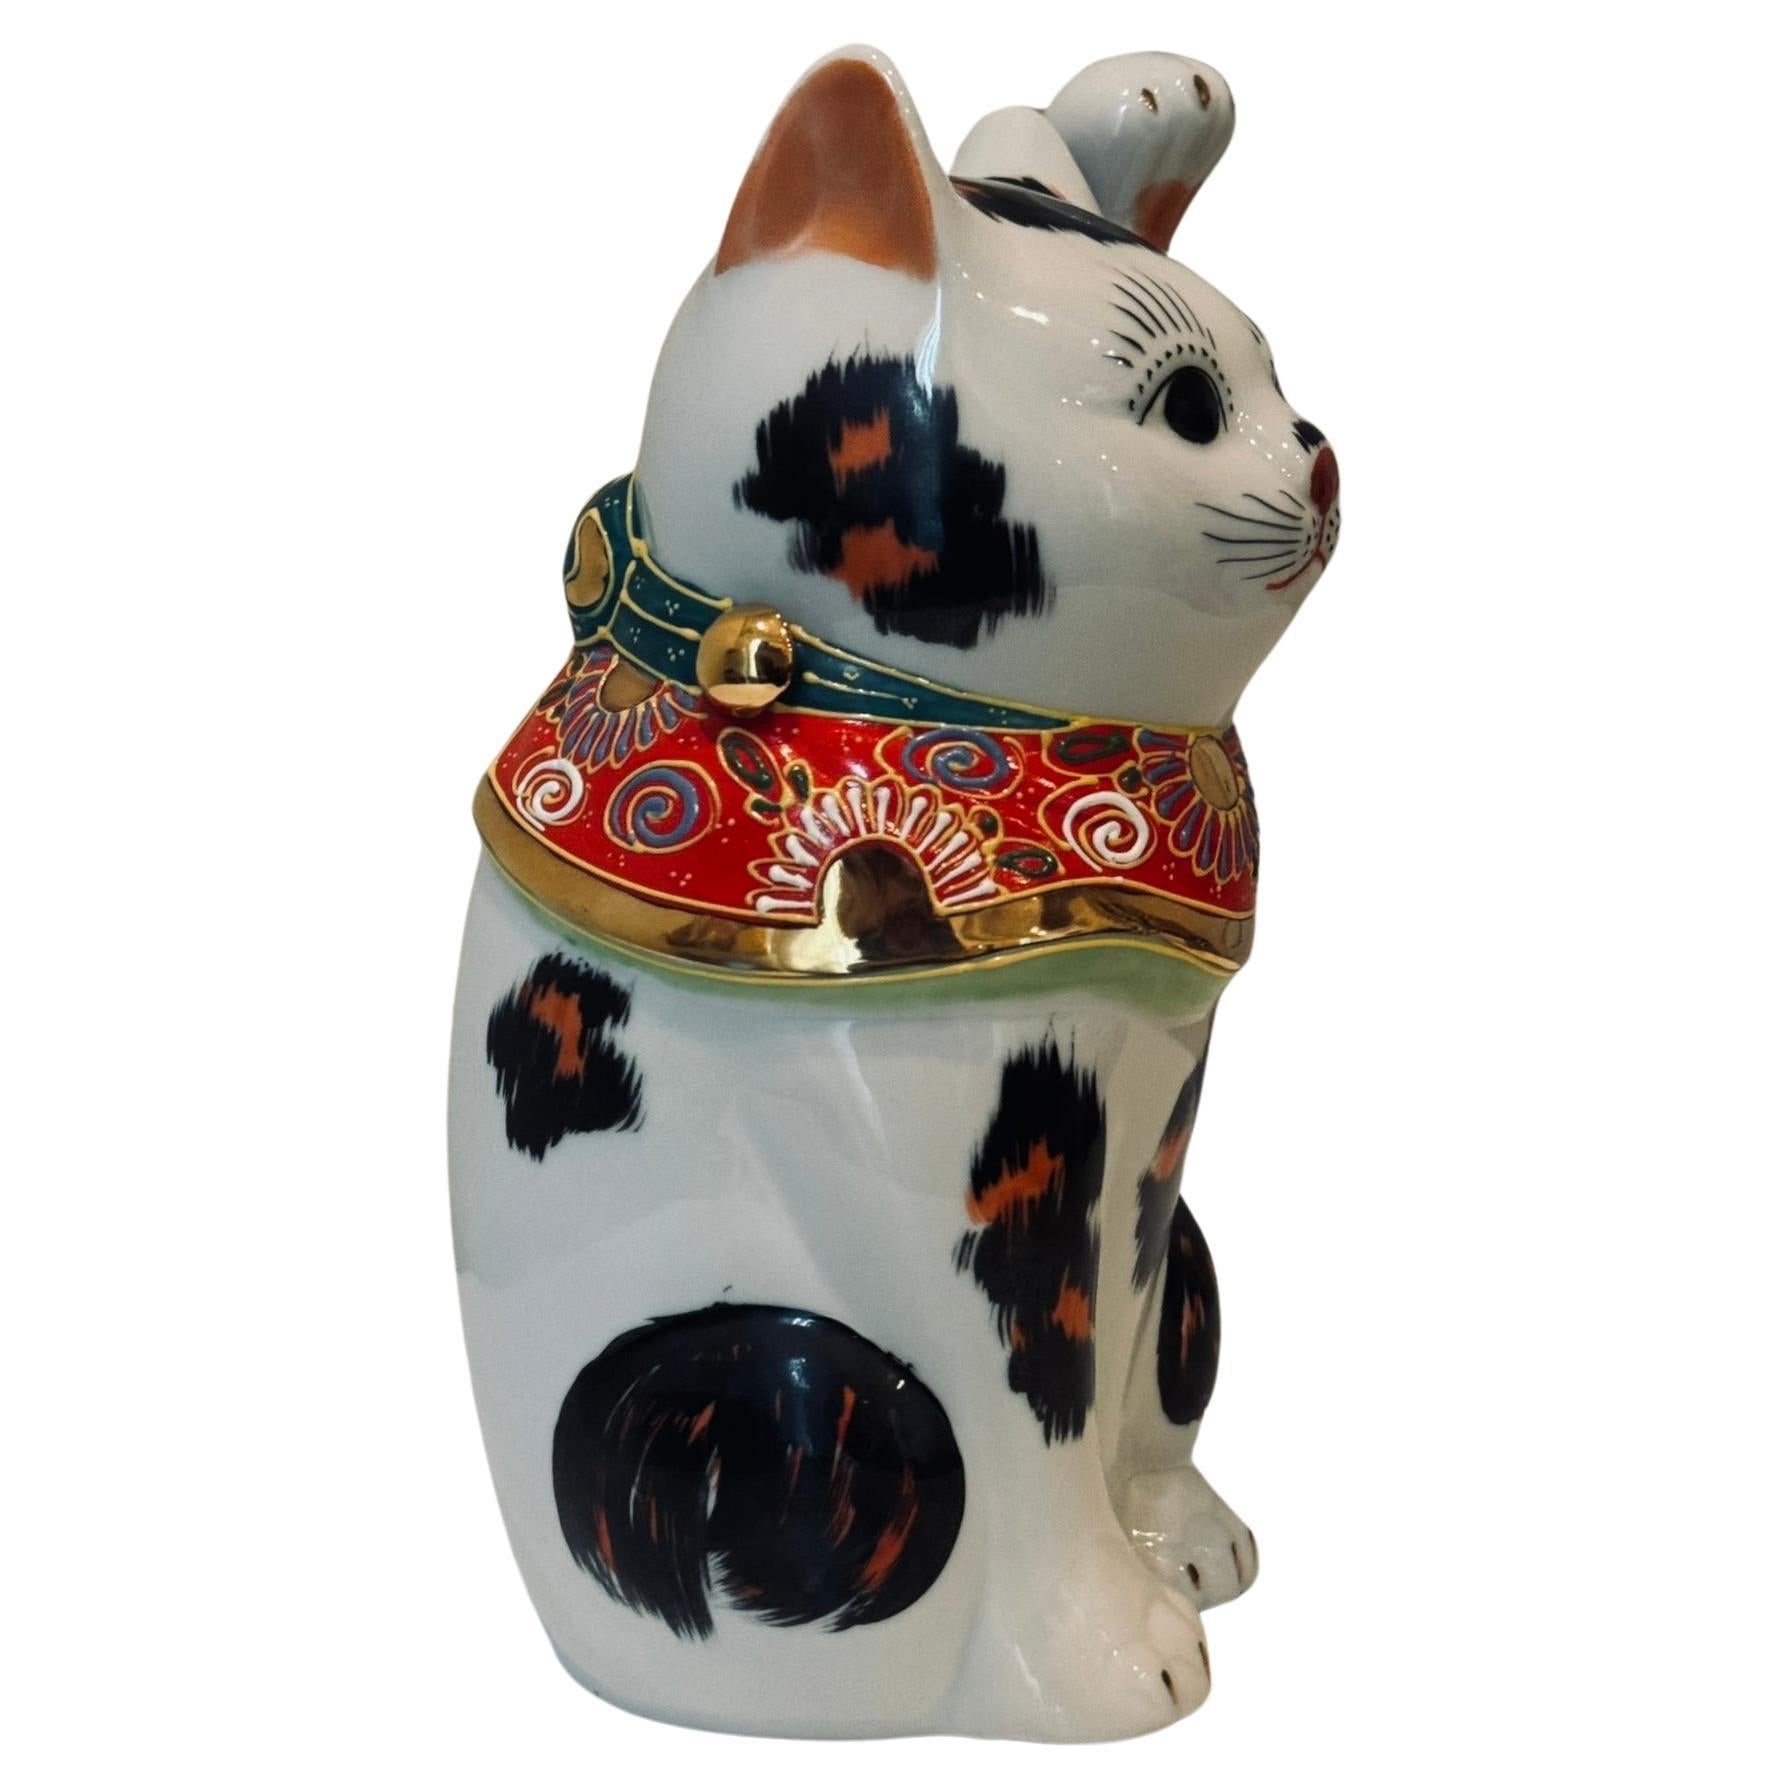 Charming beckoning cat with left paw raised is a gilded and hand painted porcelain piece from the Kutani region of Japan.
Beckoning cats come in two varieties. The more common right-handed beckoning cat (with right paw raised) is said to bring money